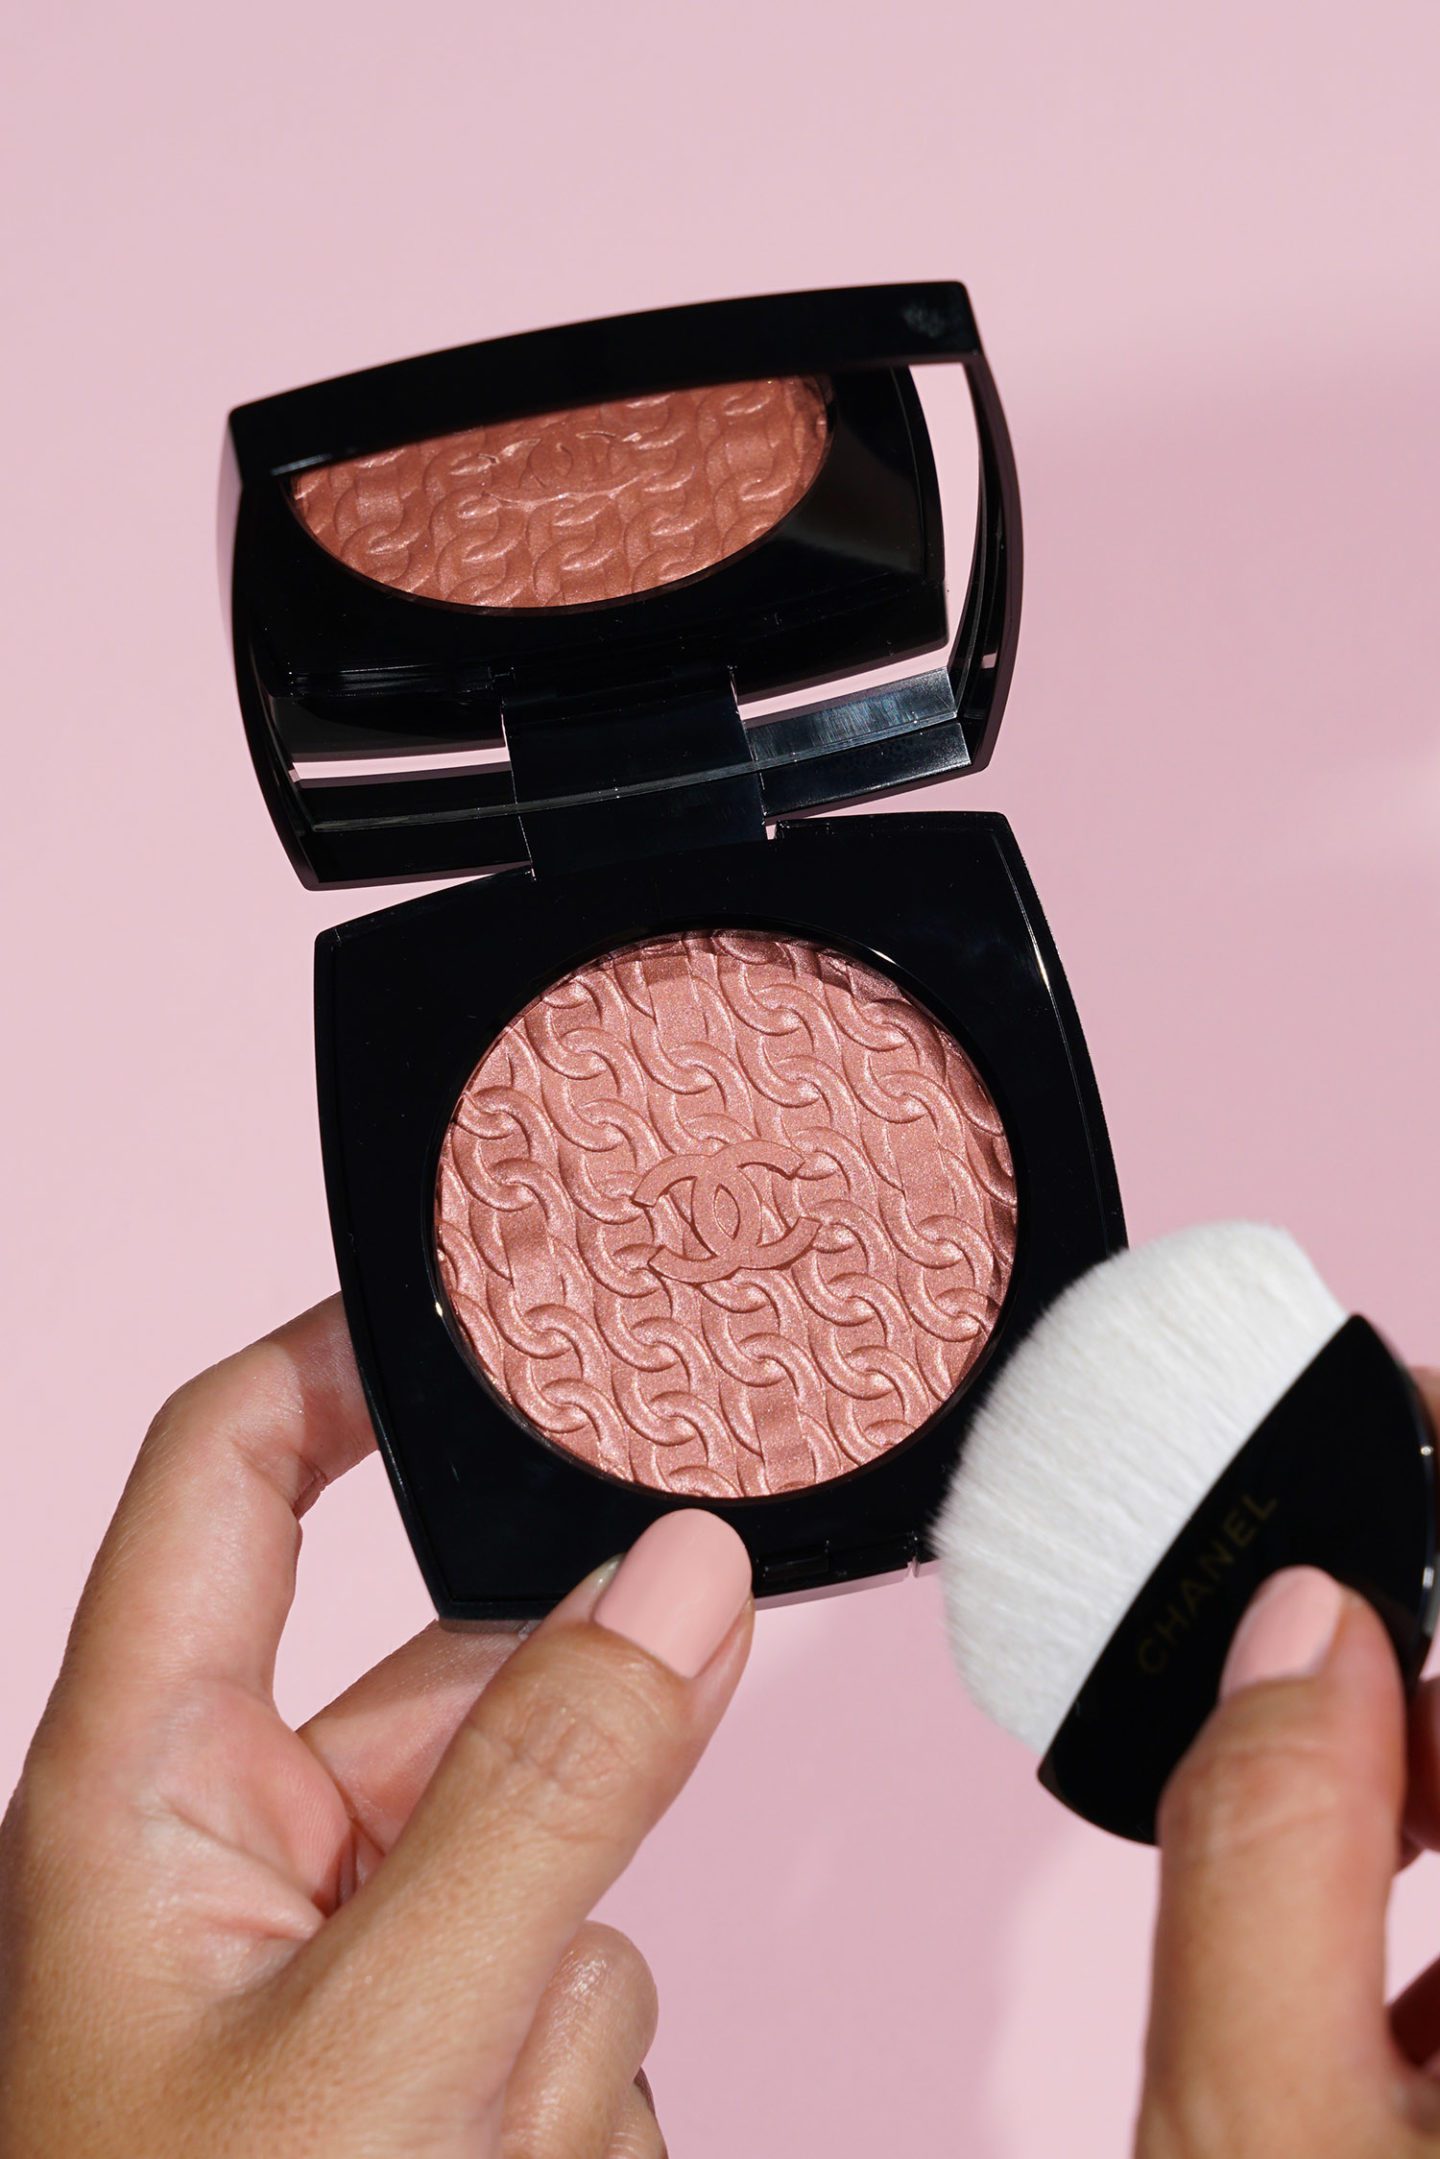 Chanel Les Chaines de Chanel Illuminating Blush | The Beauty Look Book